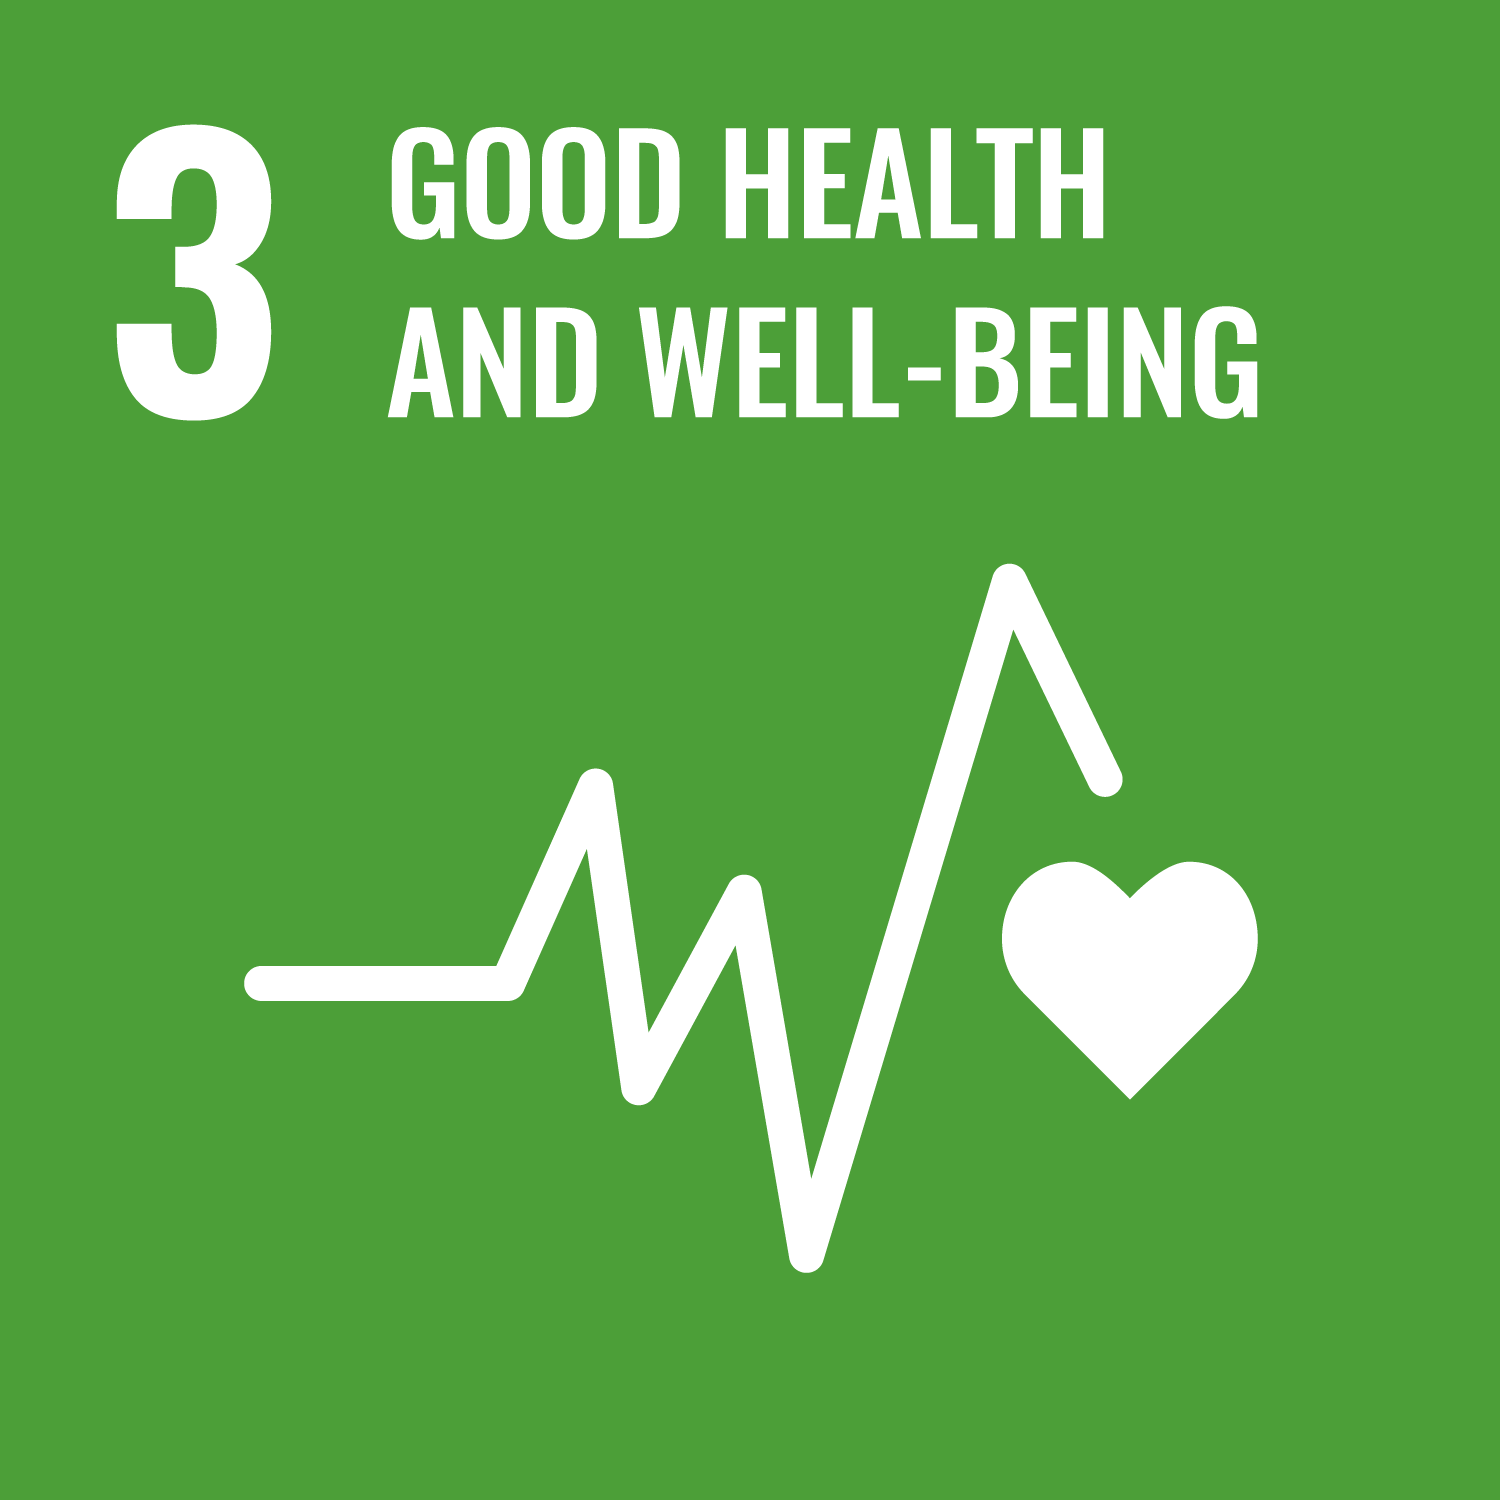 Goal 3: Good Health and Well Being